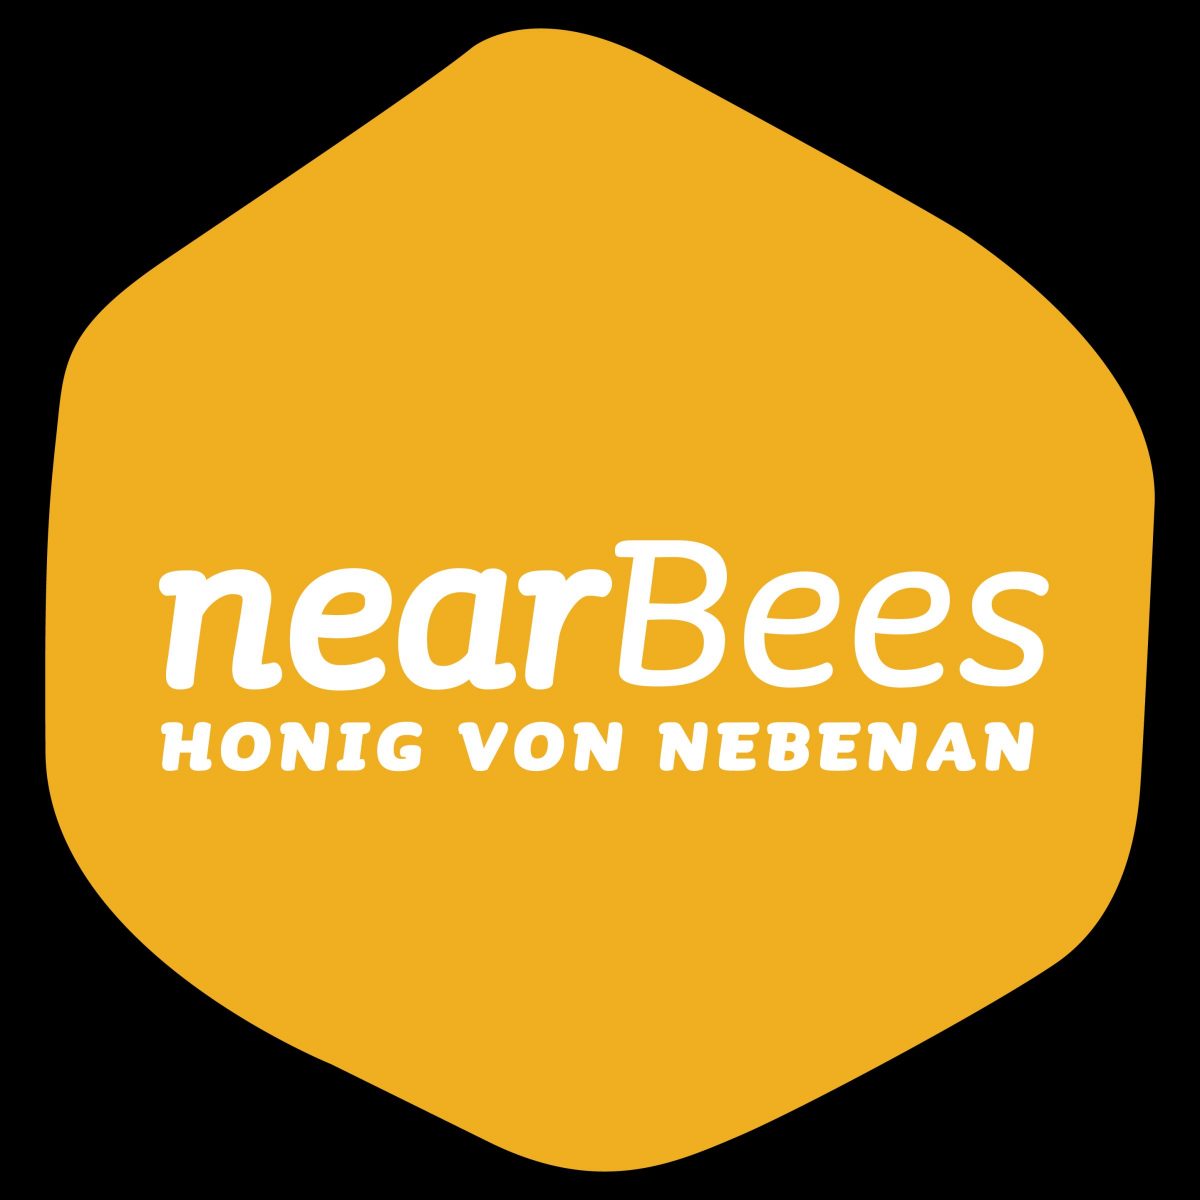 nearBees GmbH